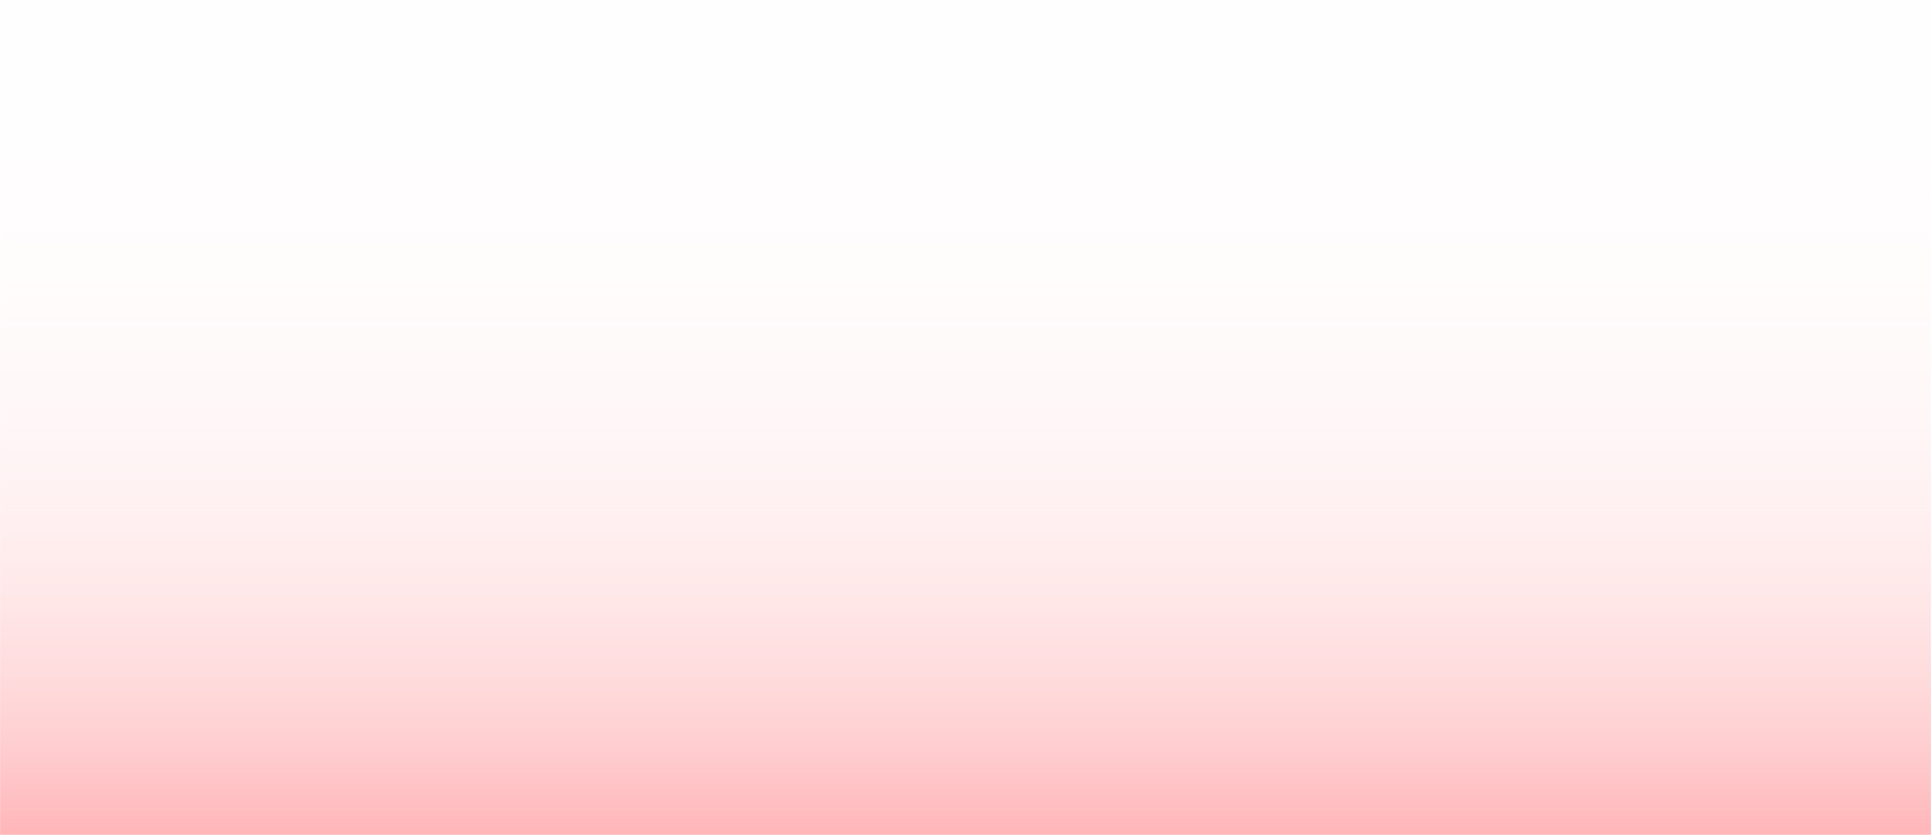 Pink Gradient That Fades To Transparency